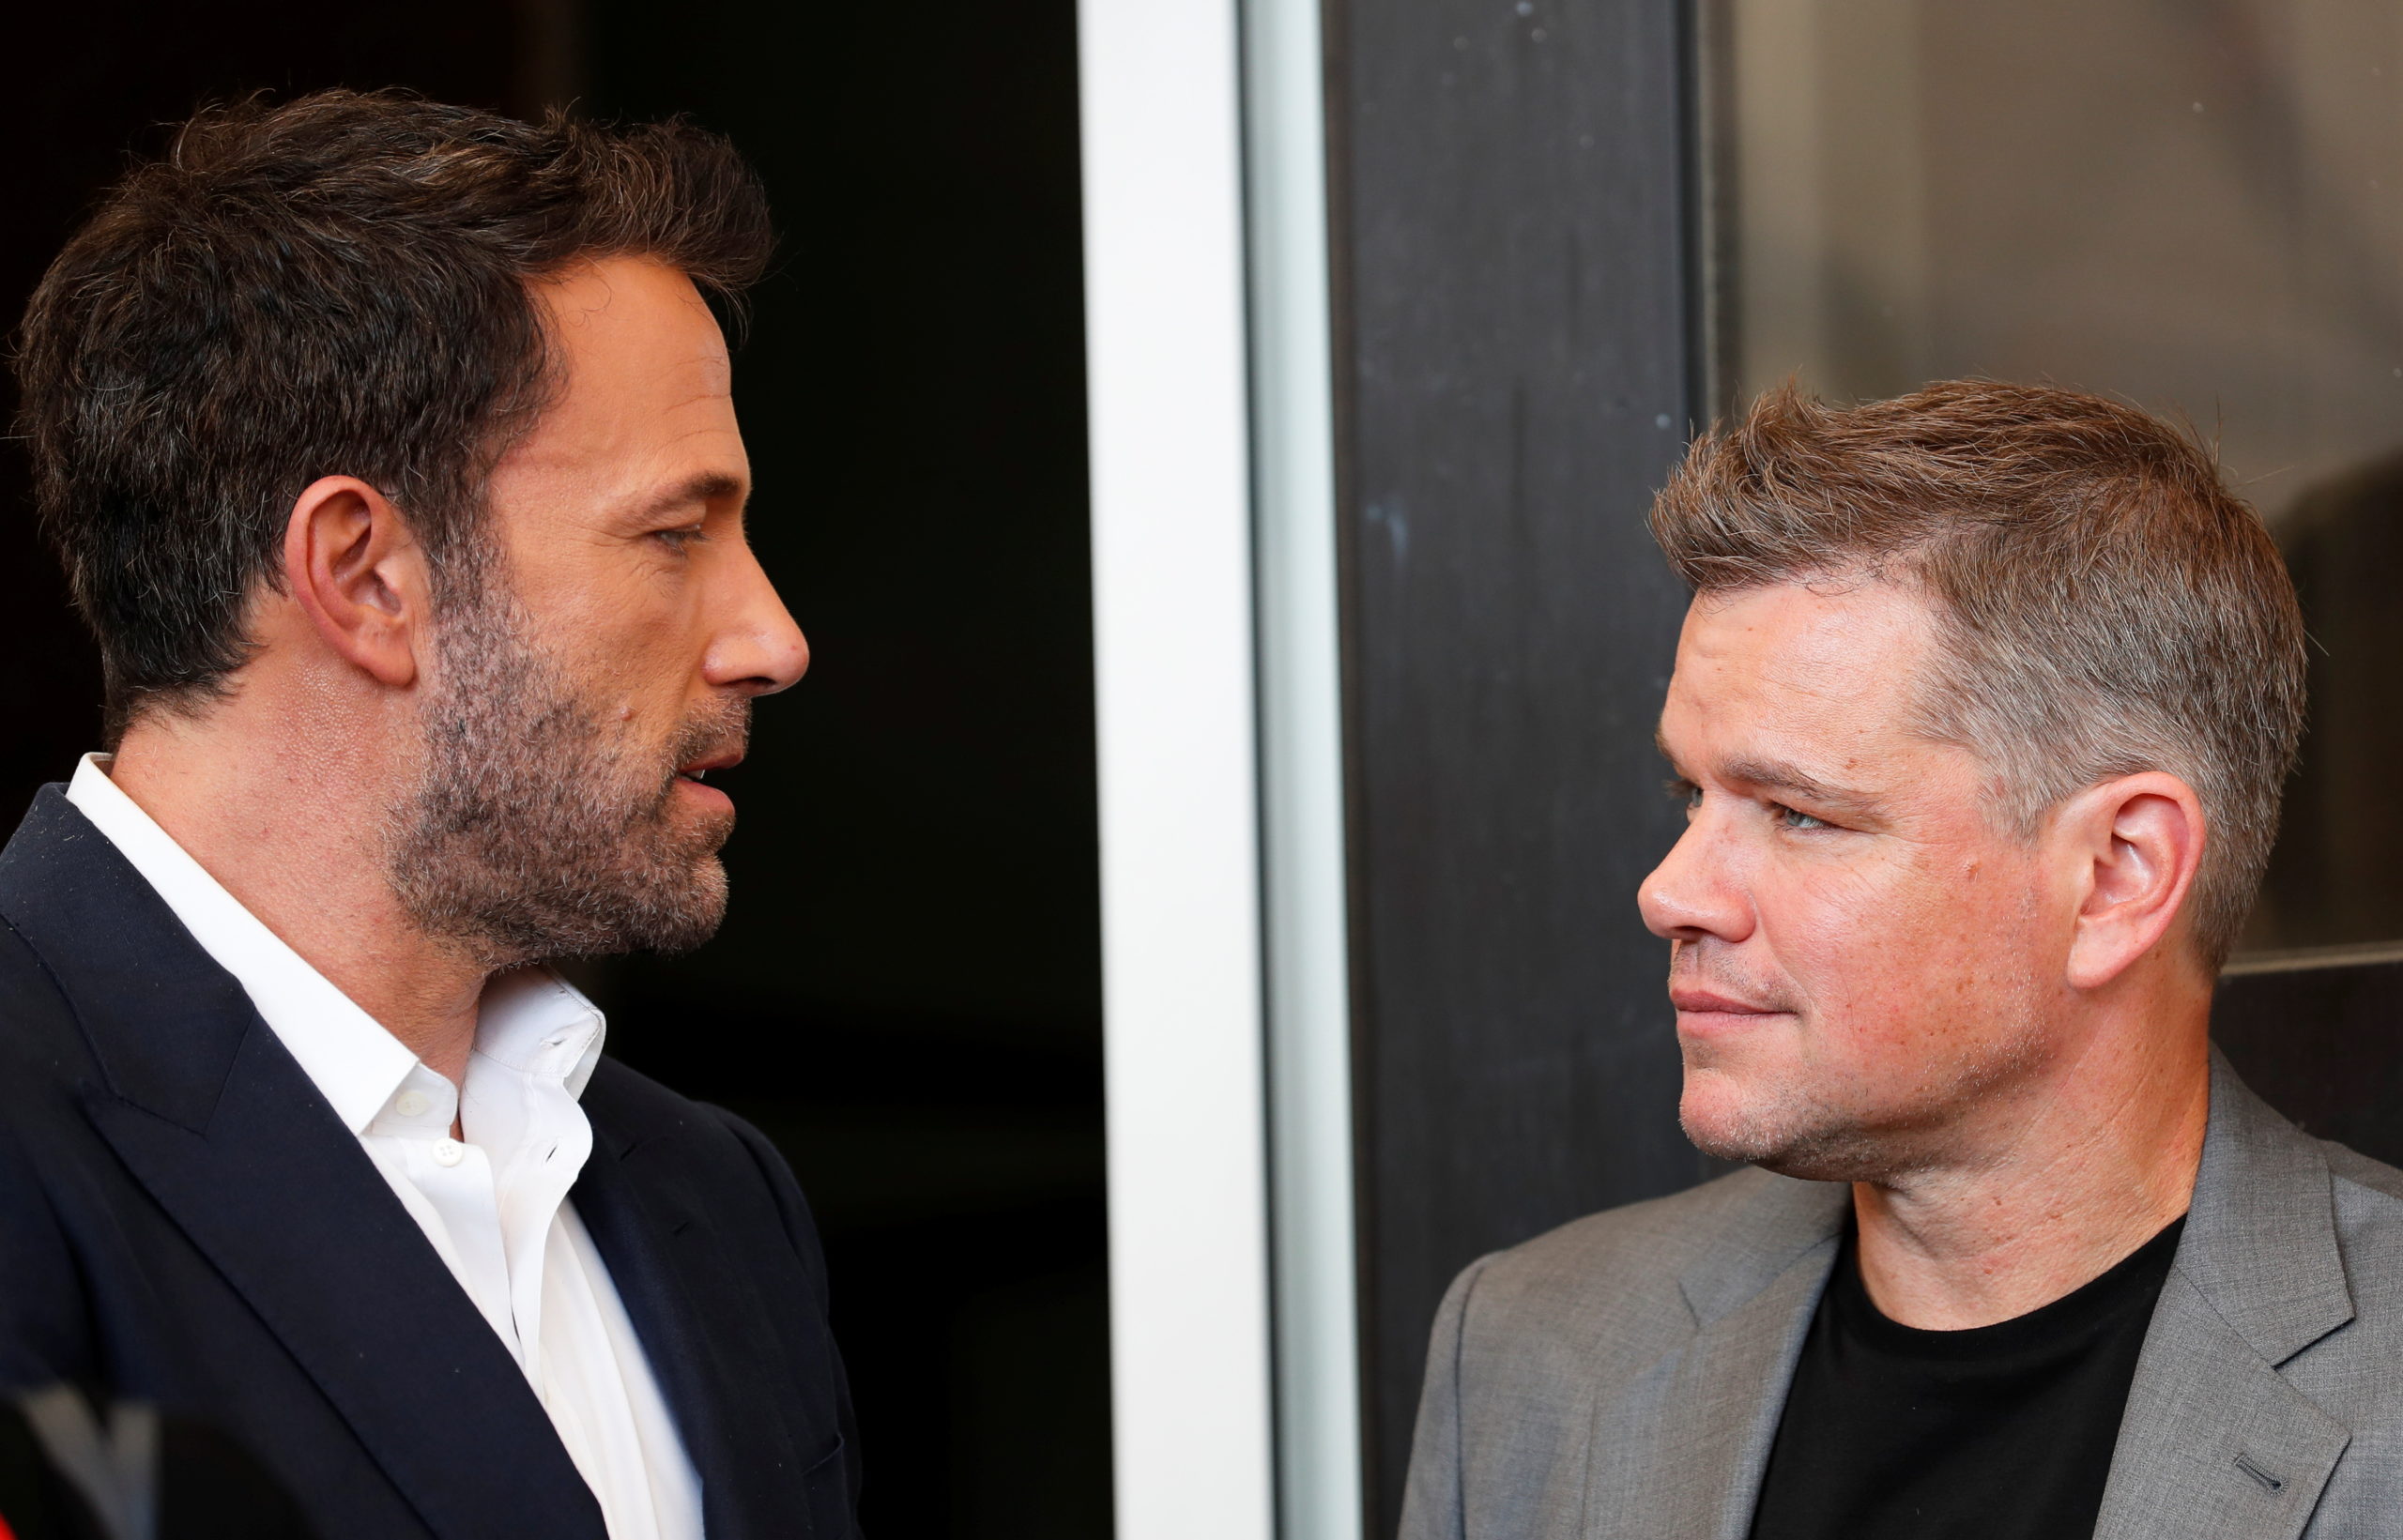 The 78th Venice Film Festival - Photo call for the film "The Last Duel" - out of competition - Venice, Italy, September 10, 2021 - Actors Ben Affleck and Matt Damon pose. 